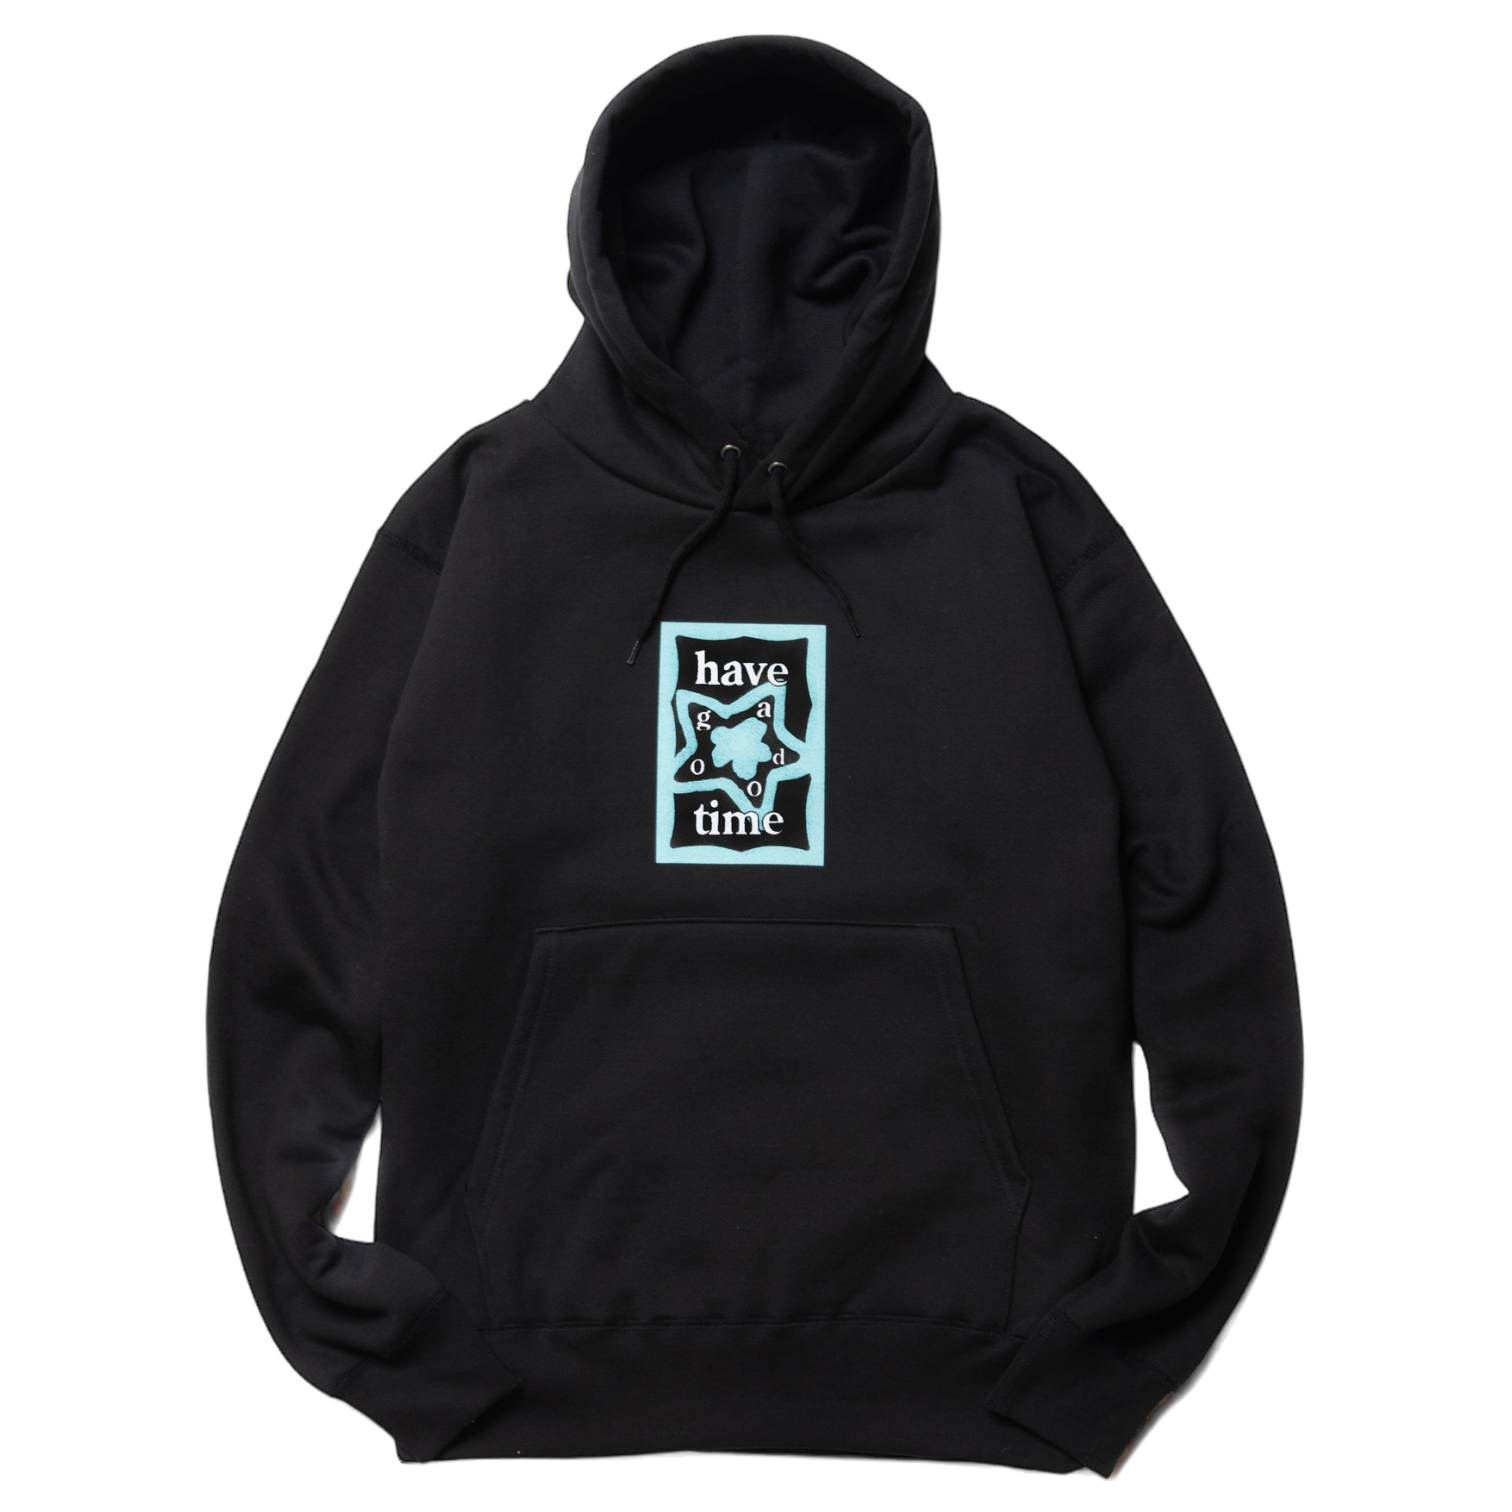 have a good time hoodie black – The Star Team